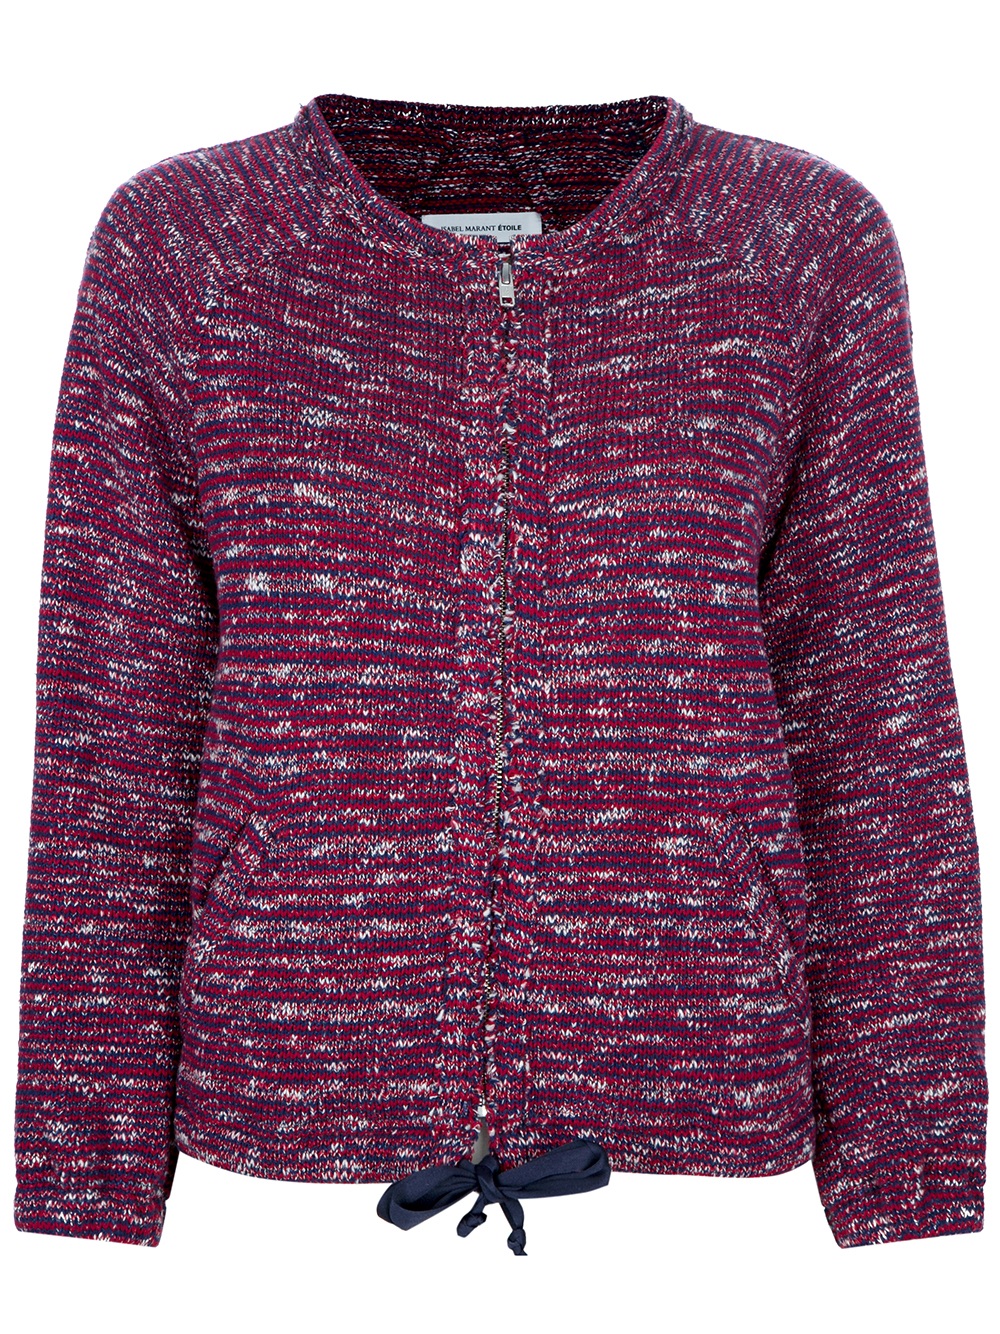 Lyst - Étoile Isabel Marant Knit Cardigan in Red